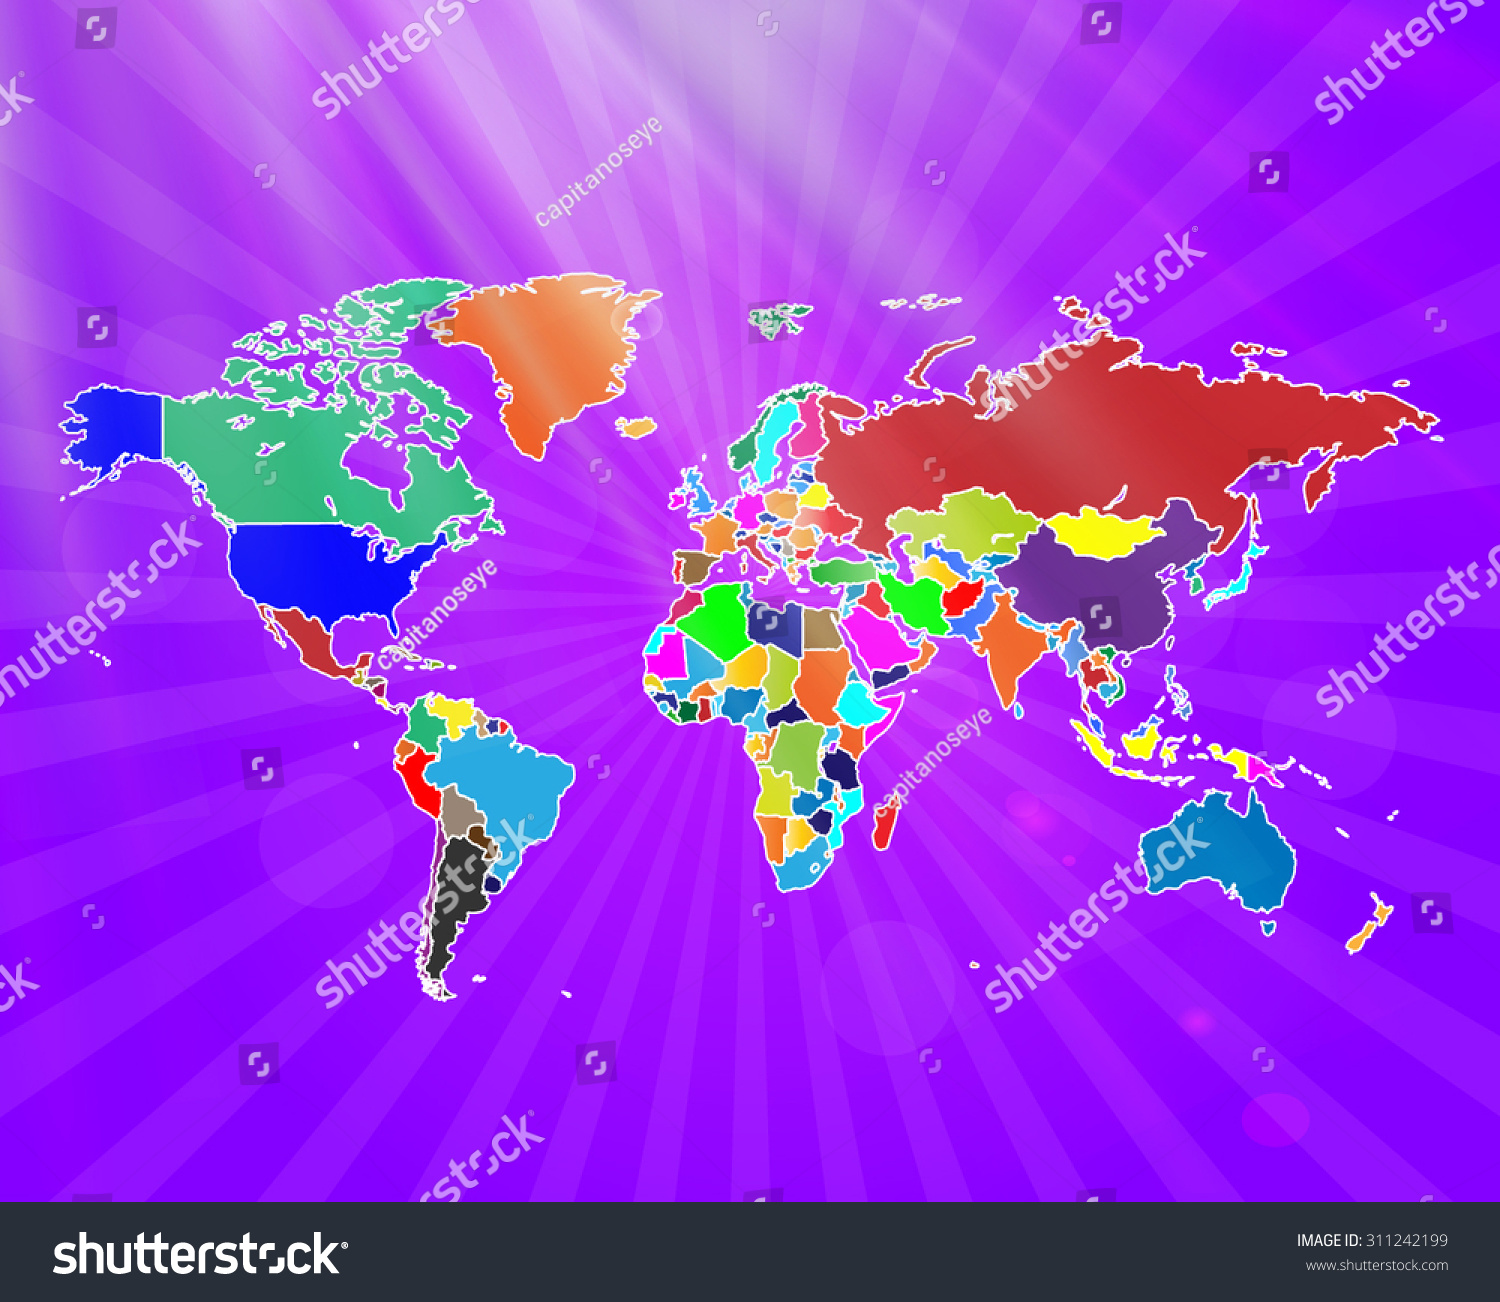 Detailed Map Of The World All Countries Royalty Free Stock Vector 311242199 4786